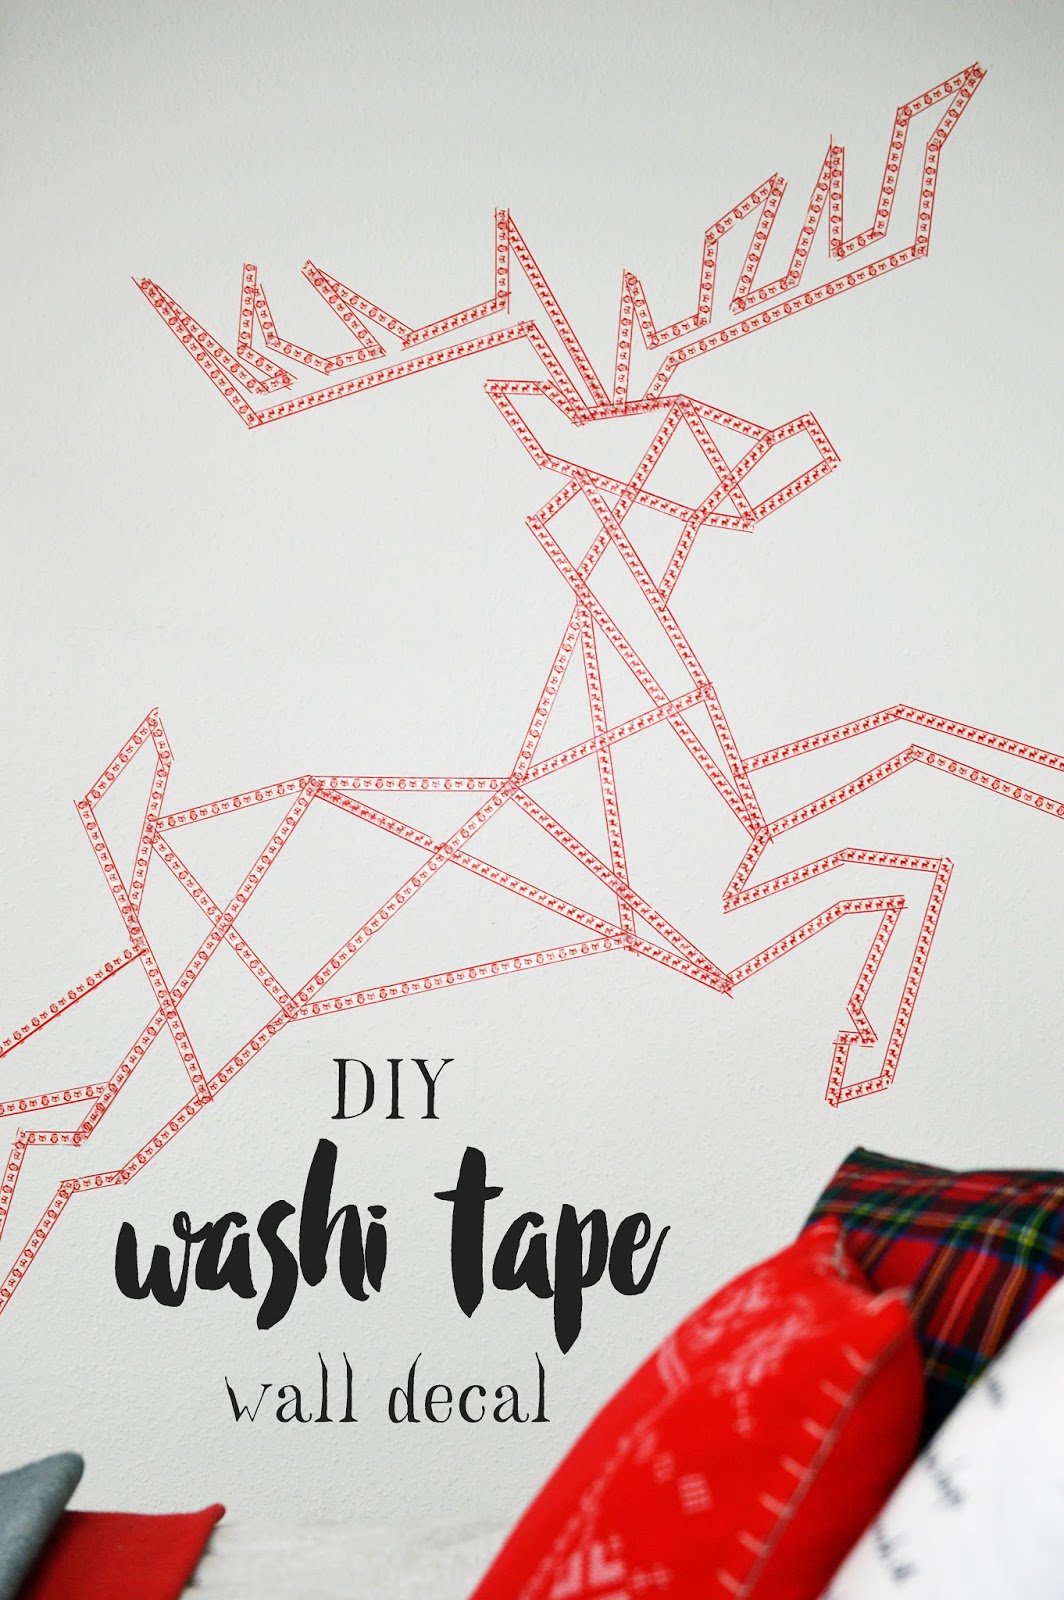 DIY Wash Tape Wall Decal | Motte's Blog